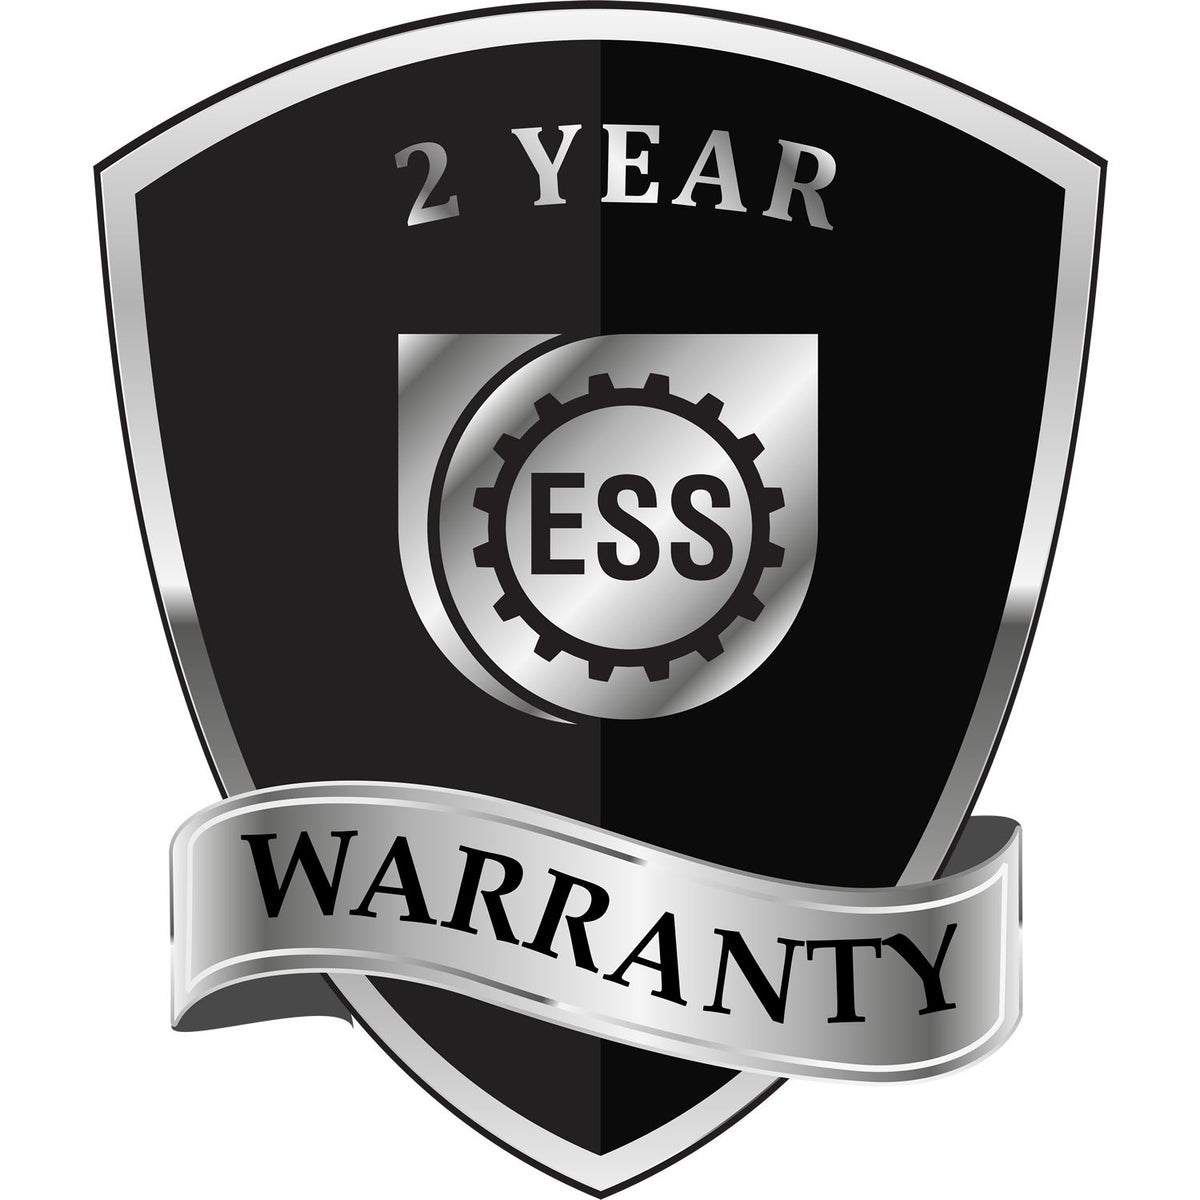 A black and silver badge or emblem showing warranty information for the Illinois Geologist Desk Seal